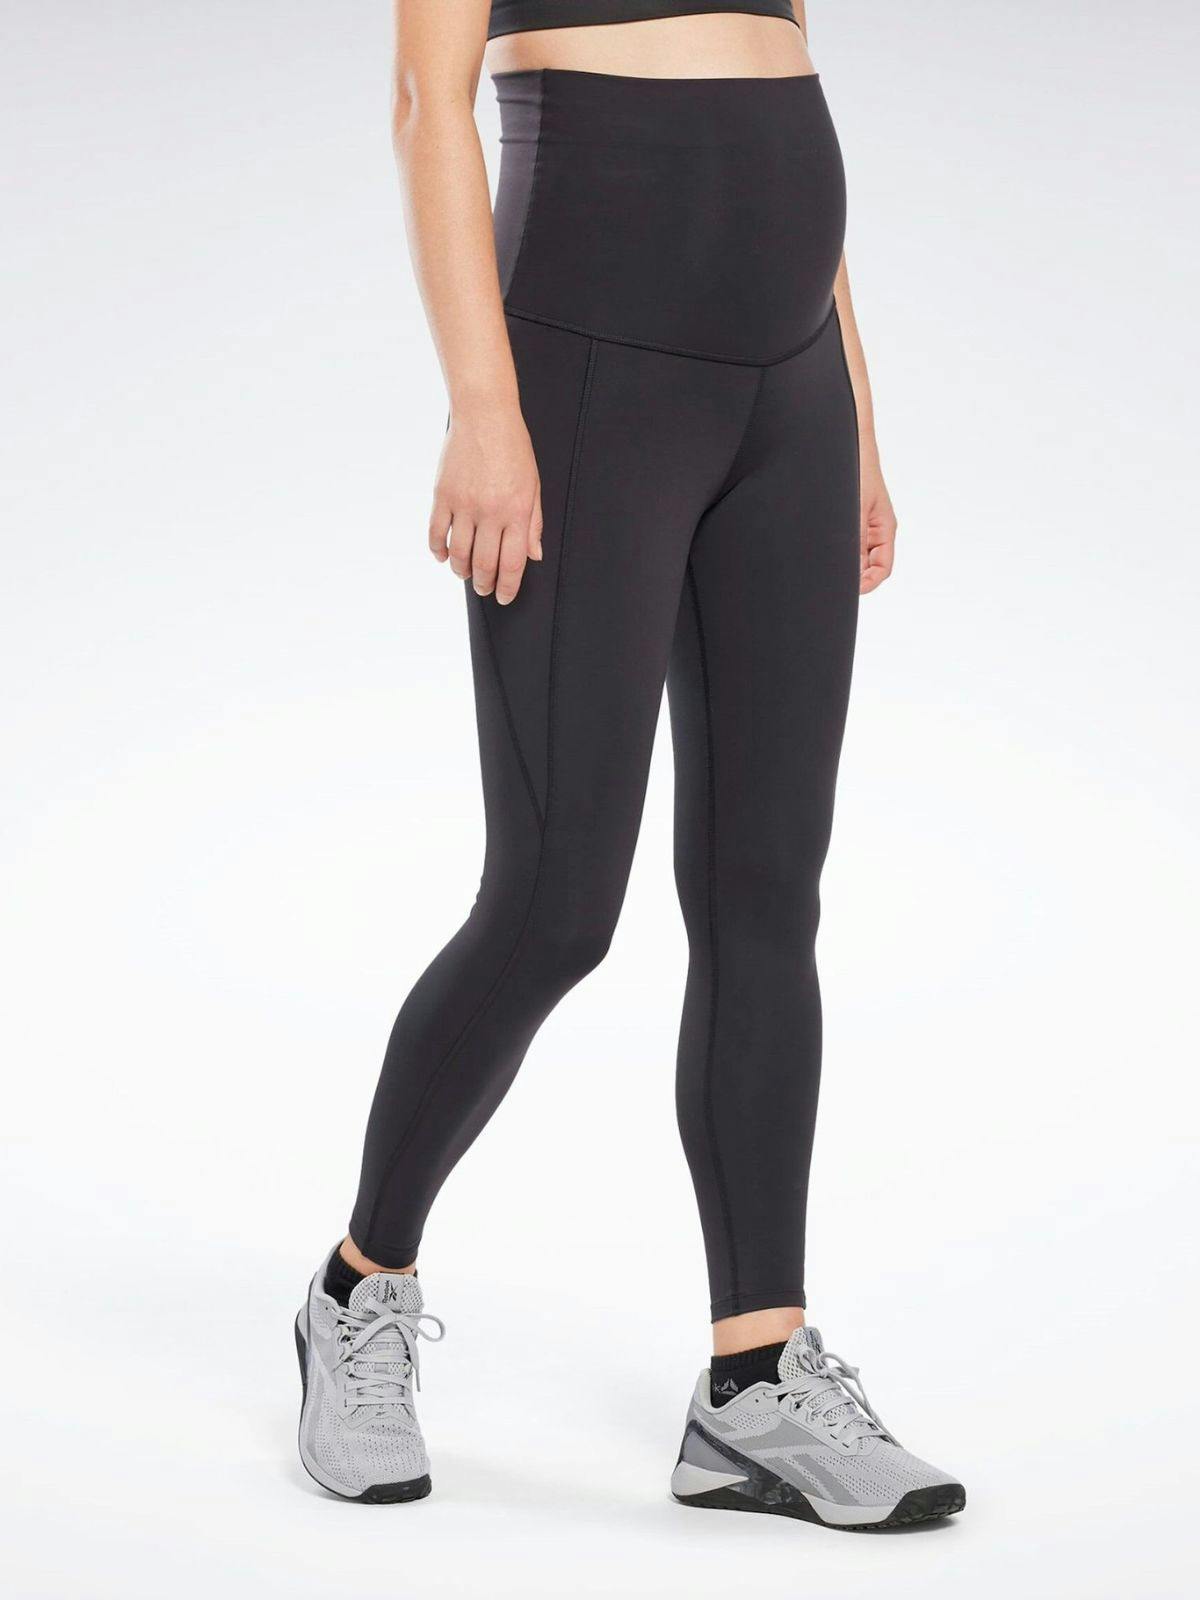 11 best Nike leggings for every type of workout